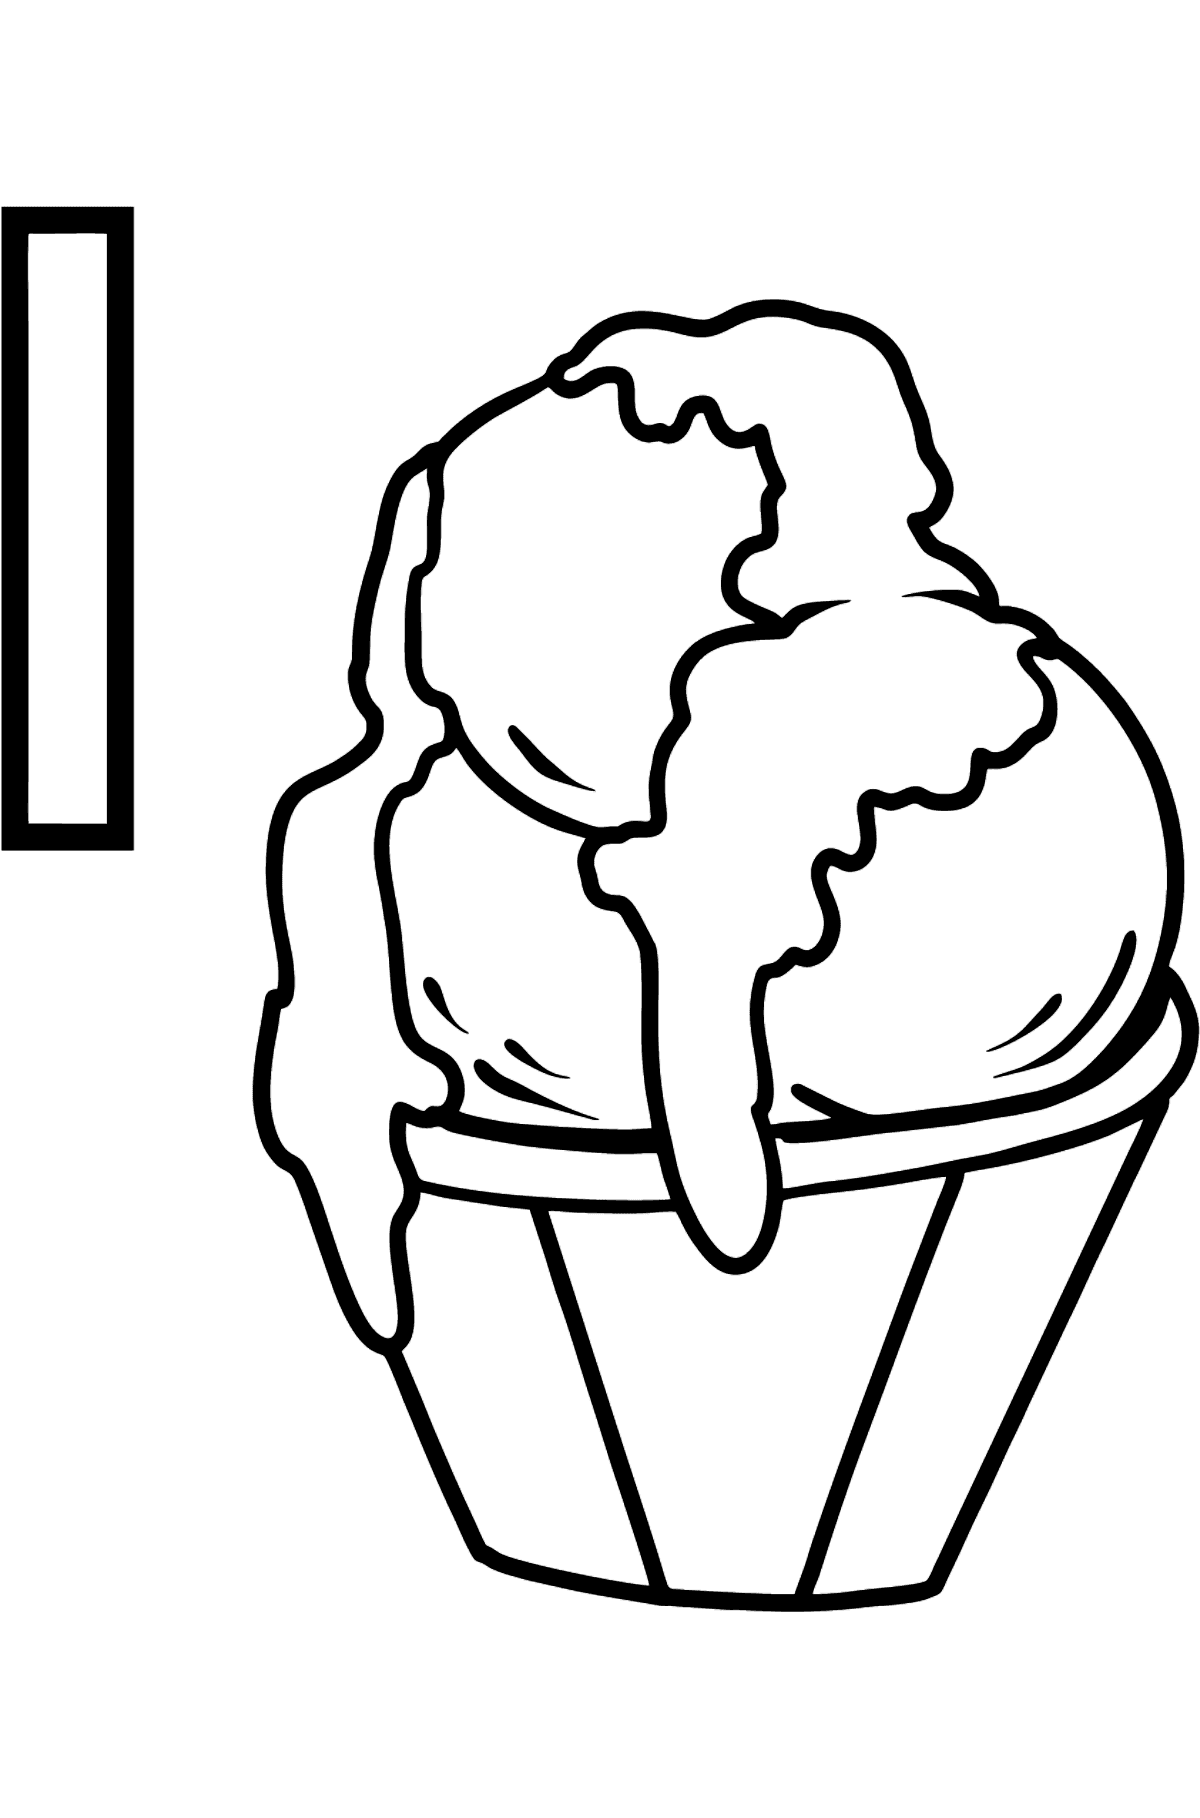 English Letter I coloring pages - ICE CREAM - Coloring Pages for Kids